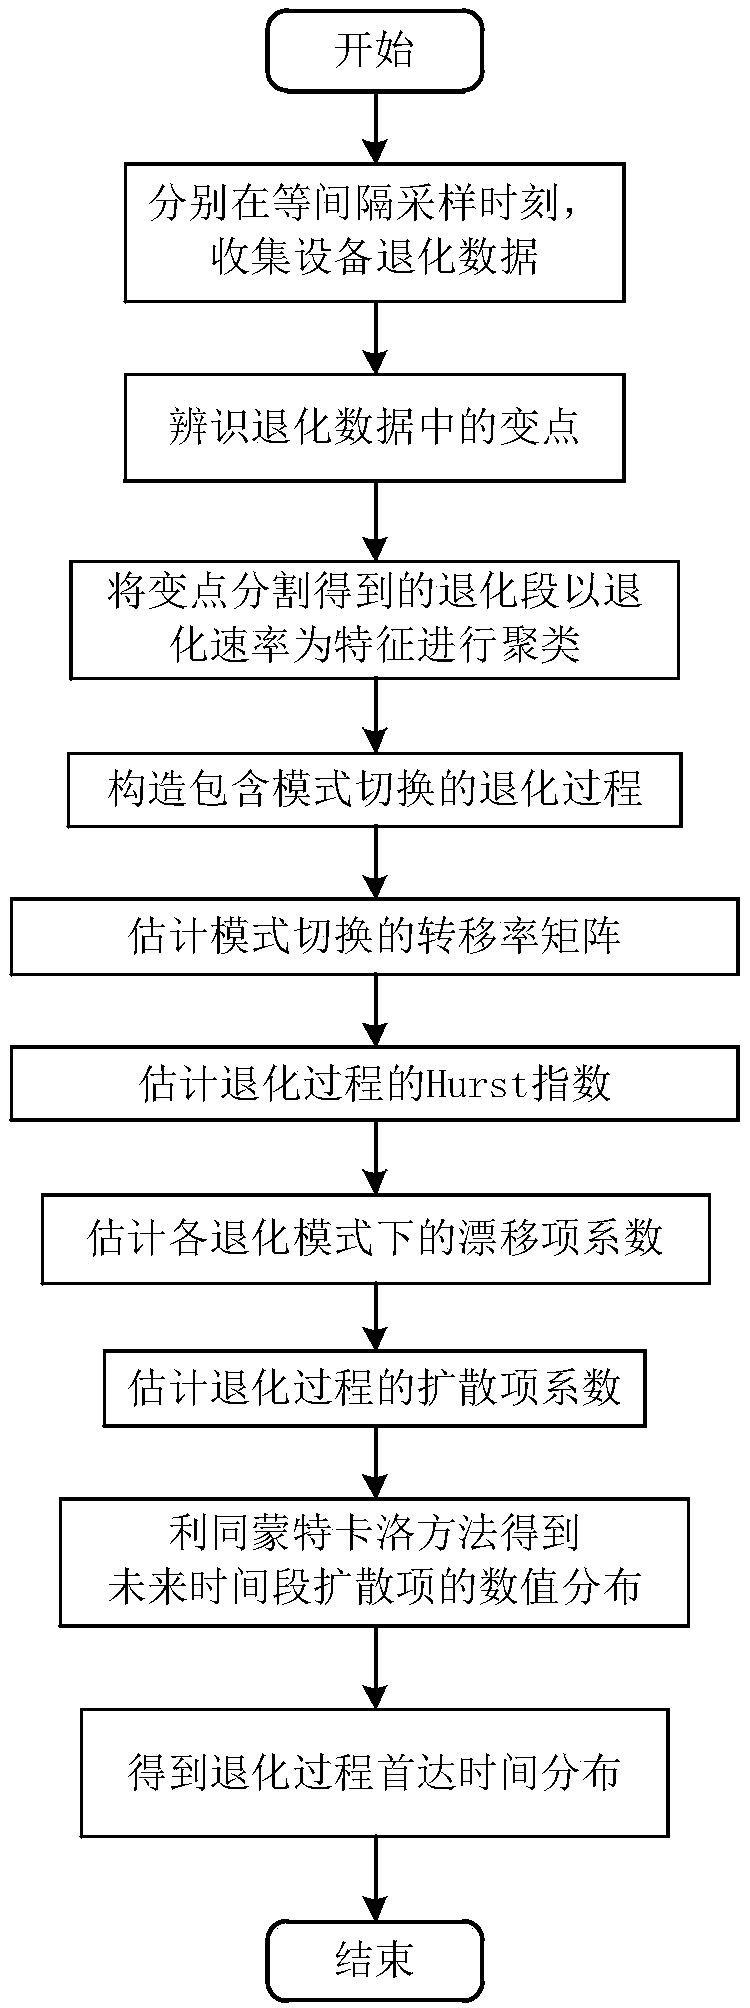 Multi-mode degradation process modeling and residual service life prediction method